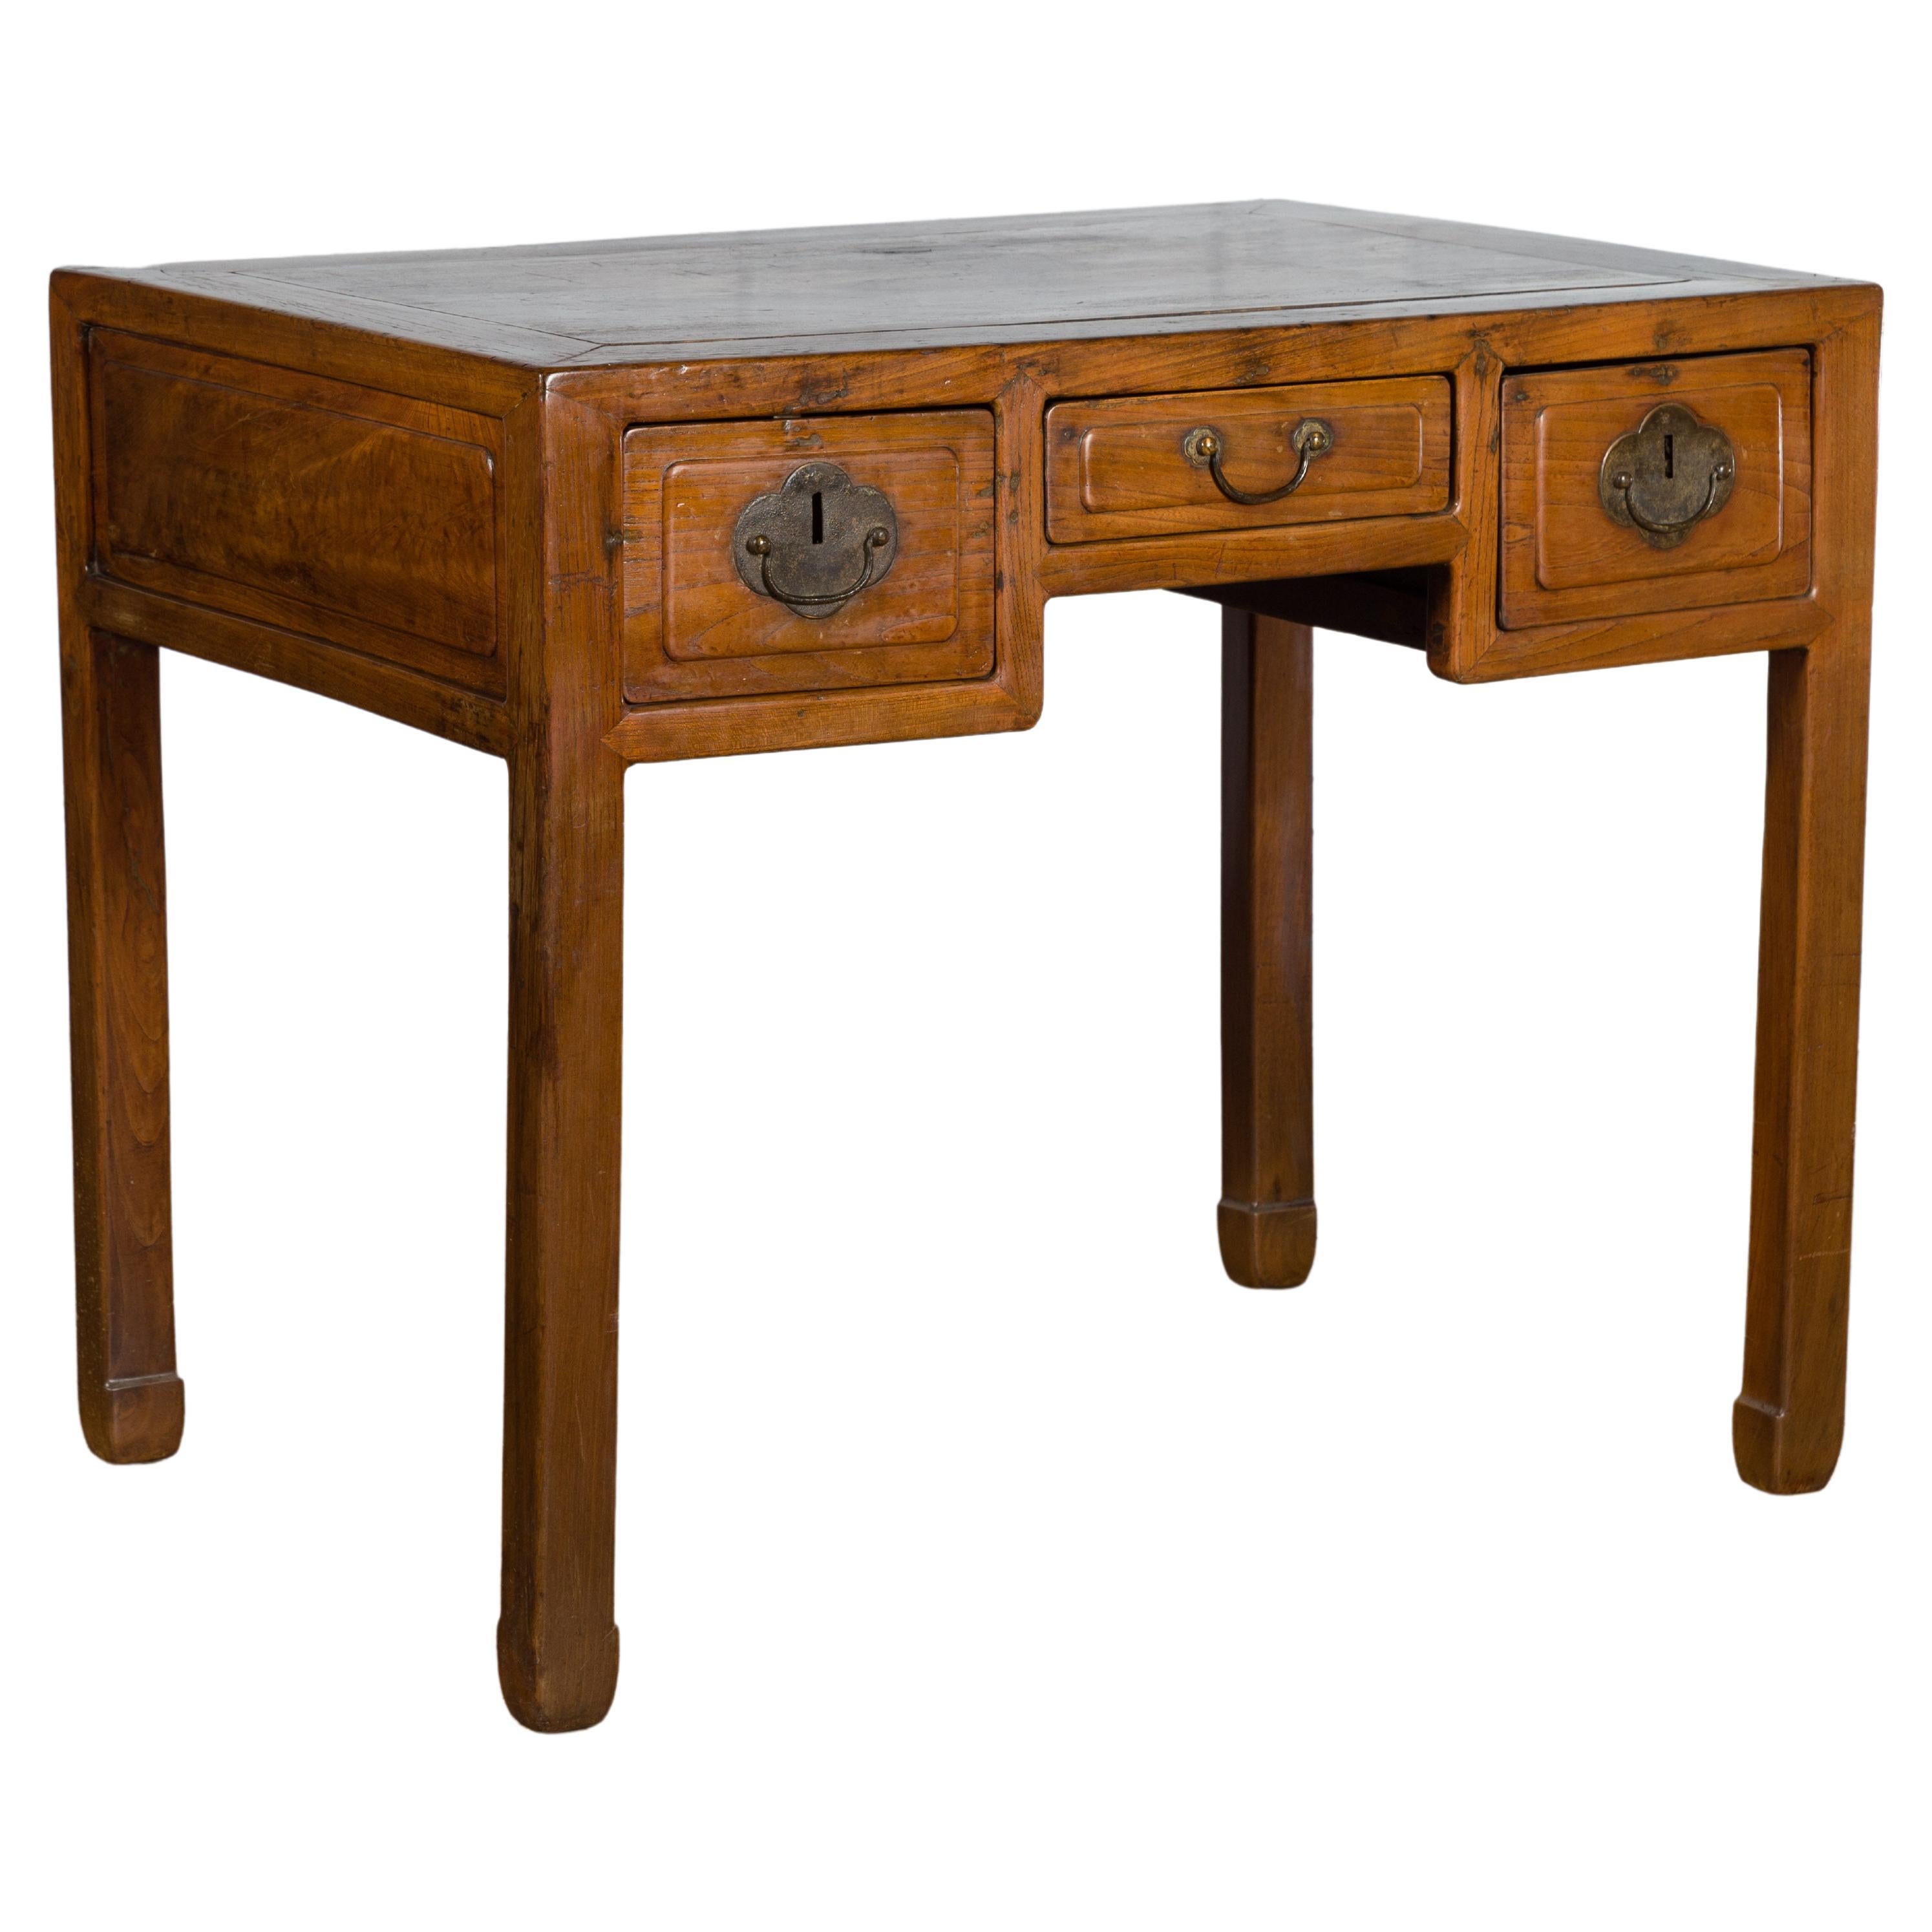 An antique Chinese three-drawer desk from the Fujian Province, with straight legs and horse hoof extremities. Created in the South-Eastern Province of Fujian during the early years of the 20th century, this desk / console table features a